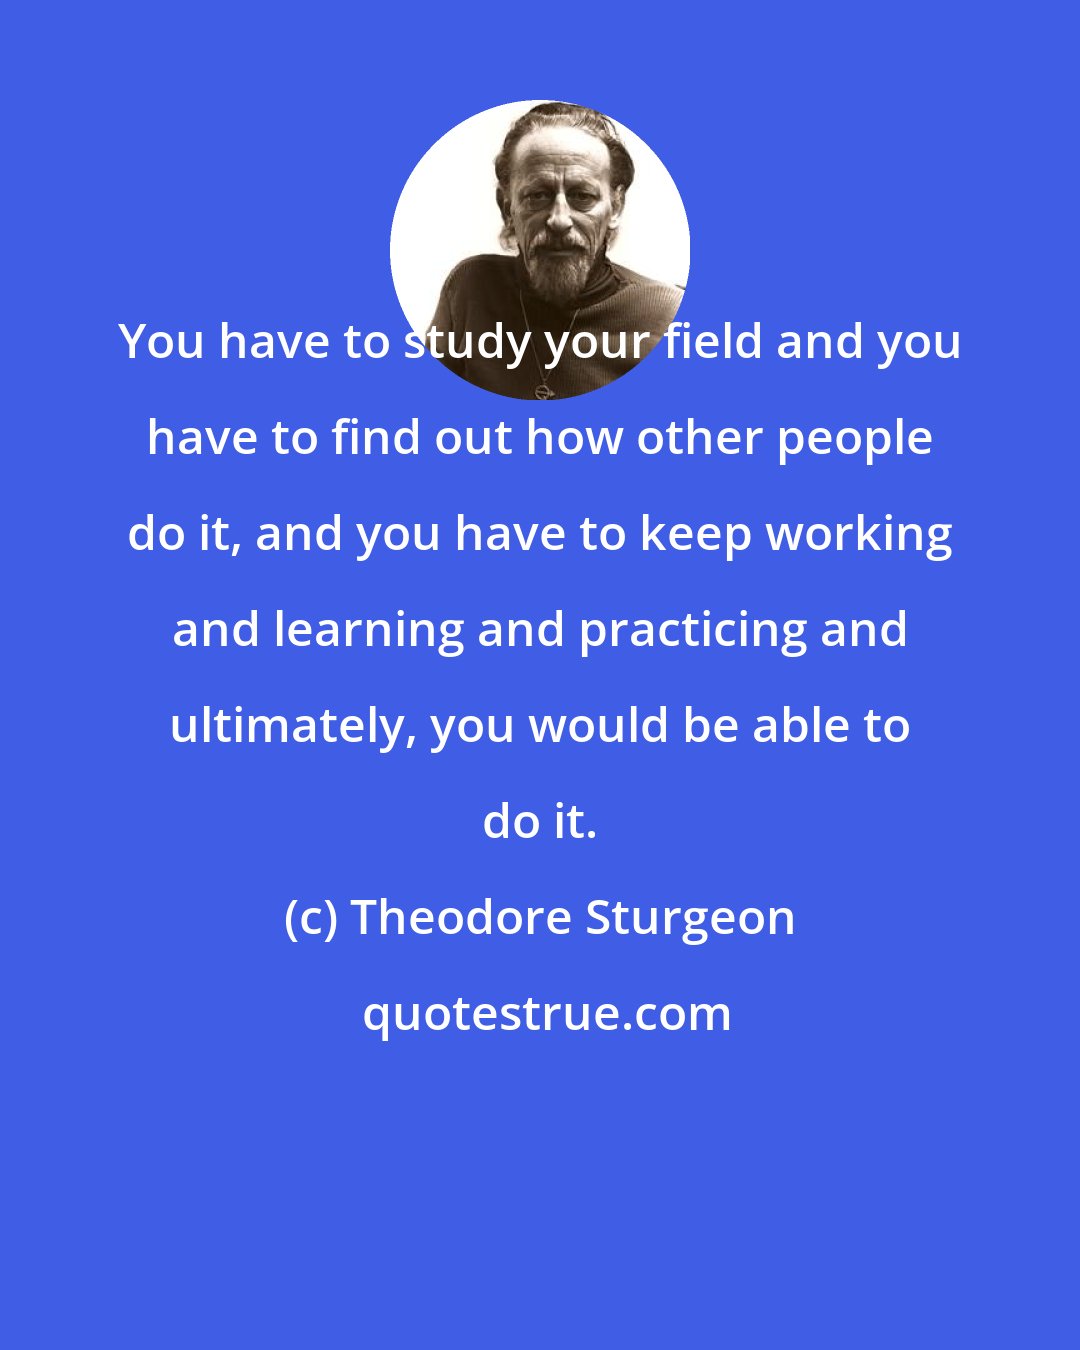 Theodore Sturgeon: You have to study your field and you have to find out how other people do it, and you have to keep working and learning and practicing and ultimately, you would be able to do it.